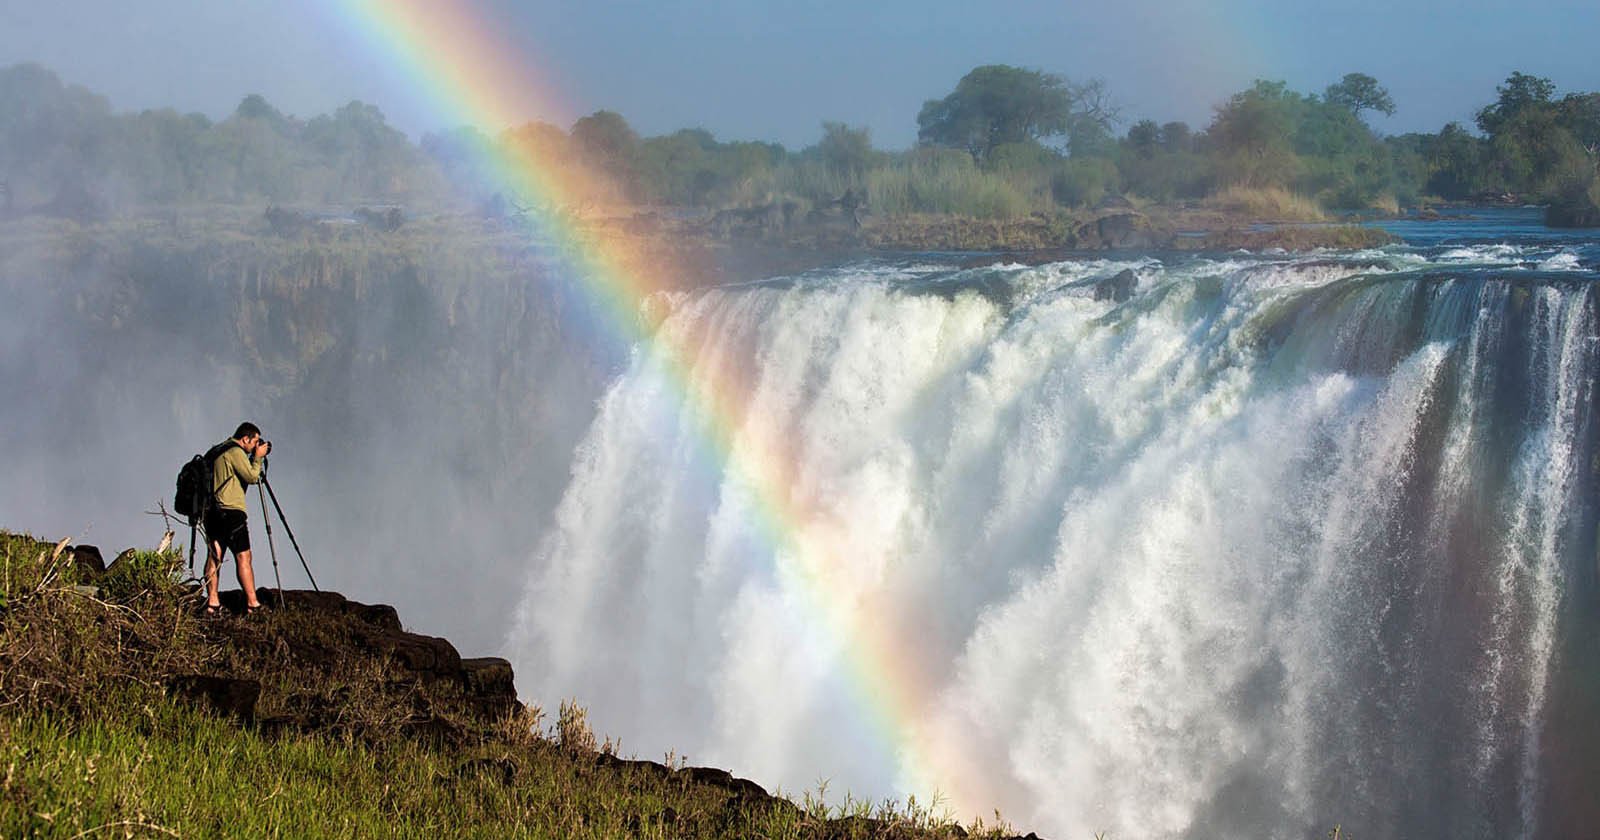 The Landscape Photographers Guide to Victoria Falls